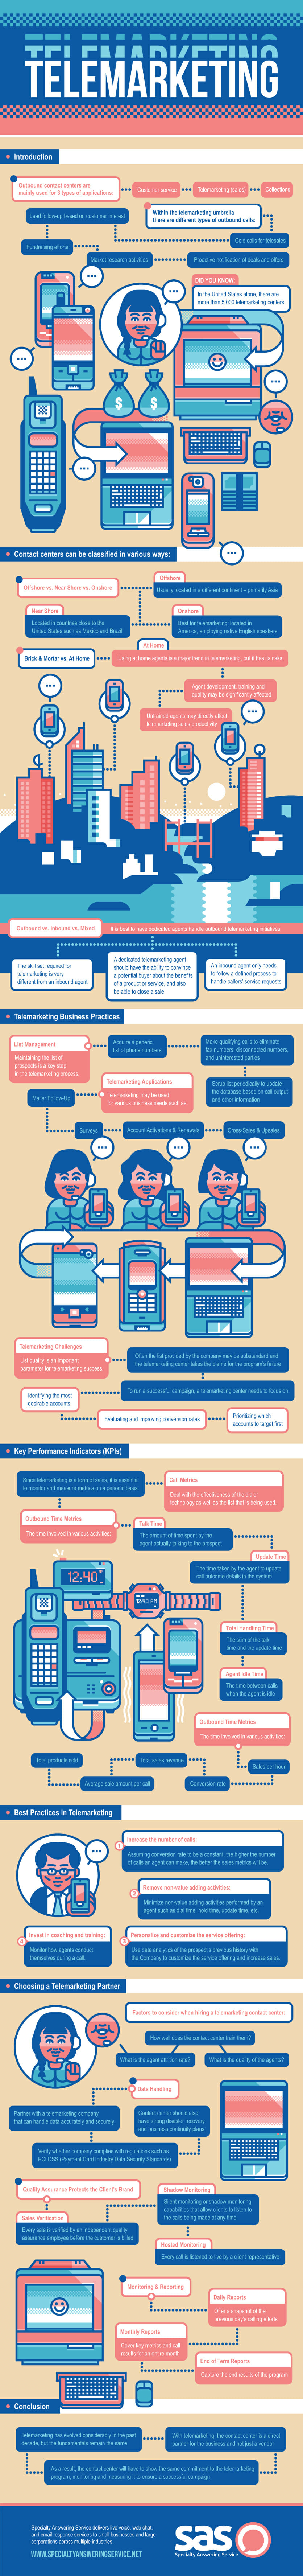 Learn About Telemarketing Infographic